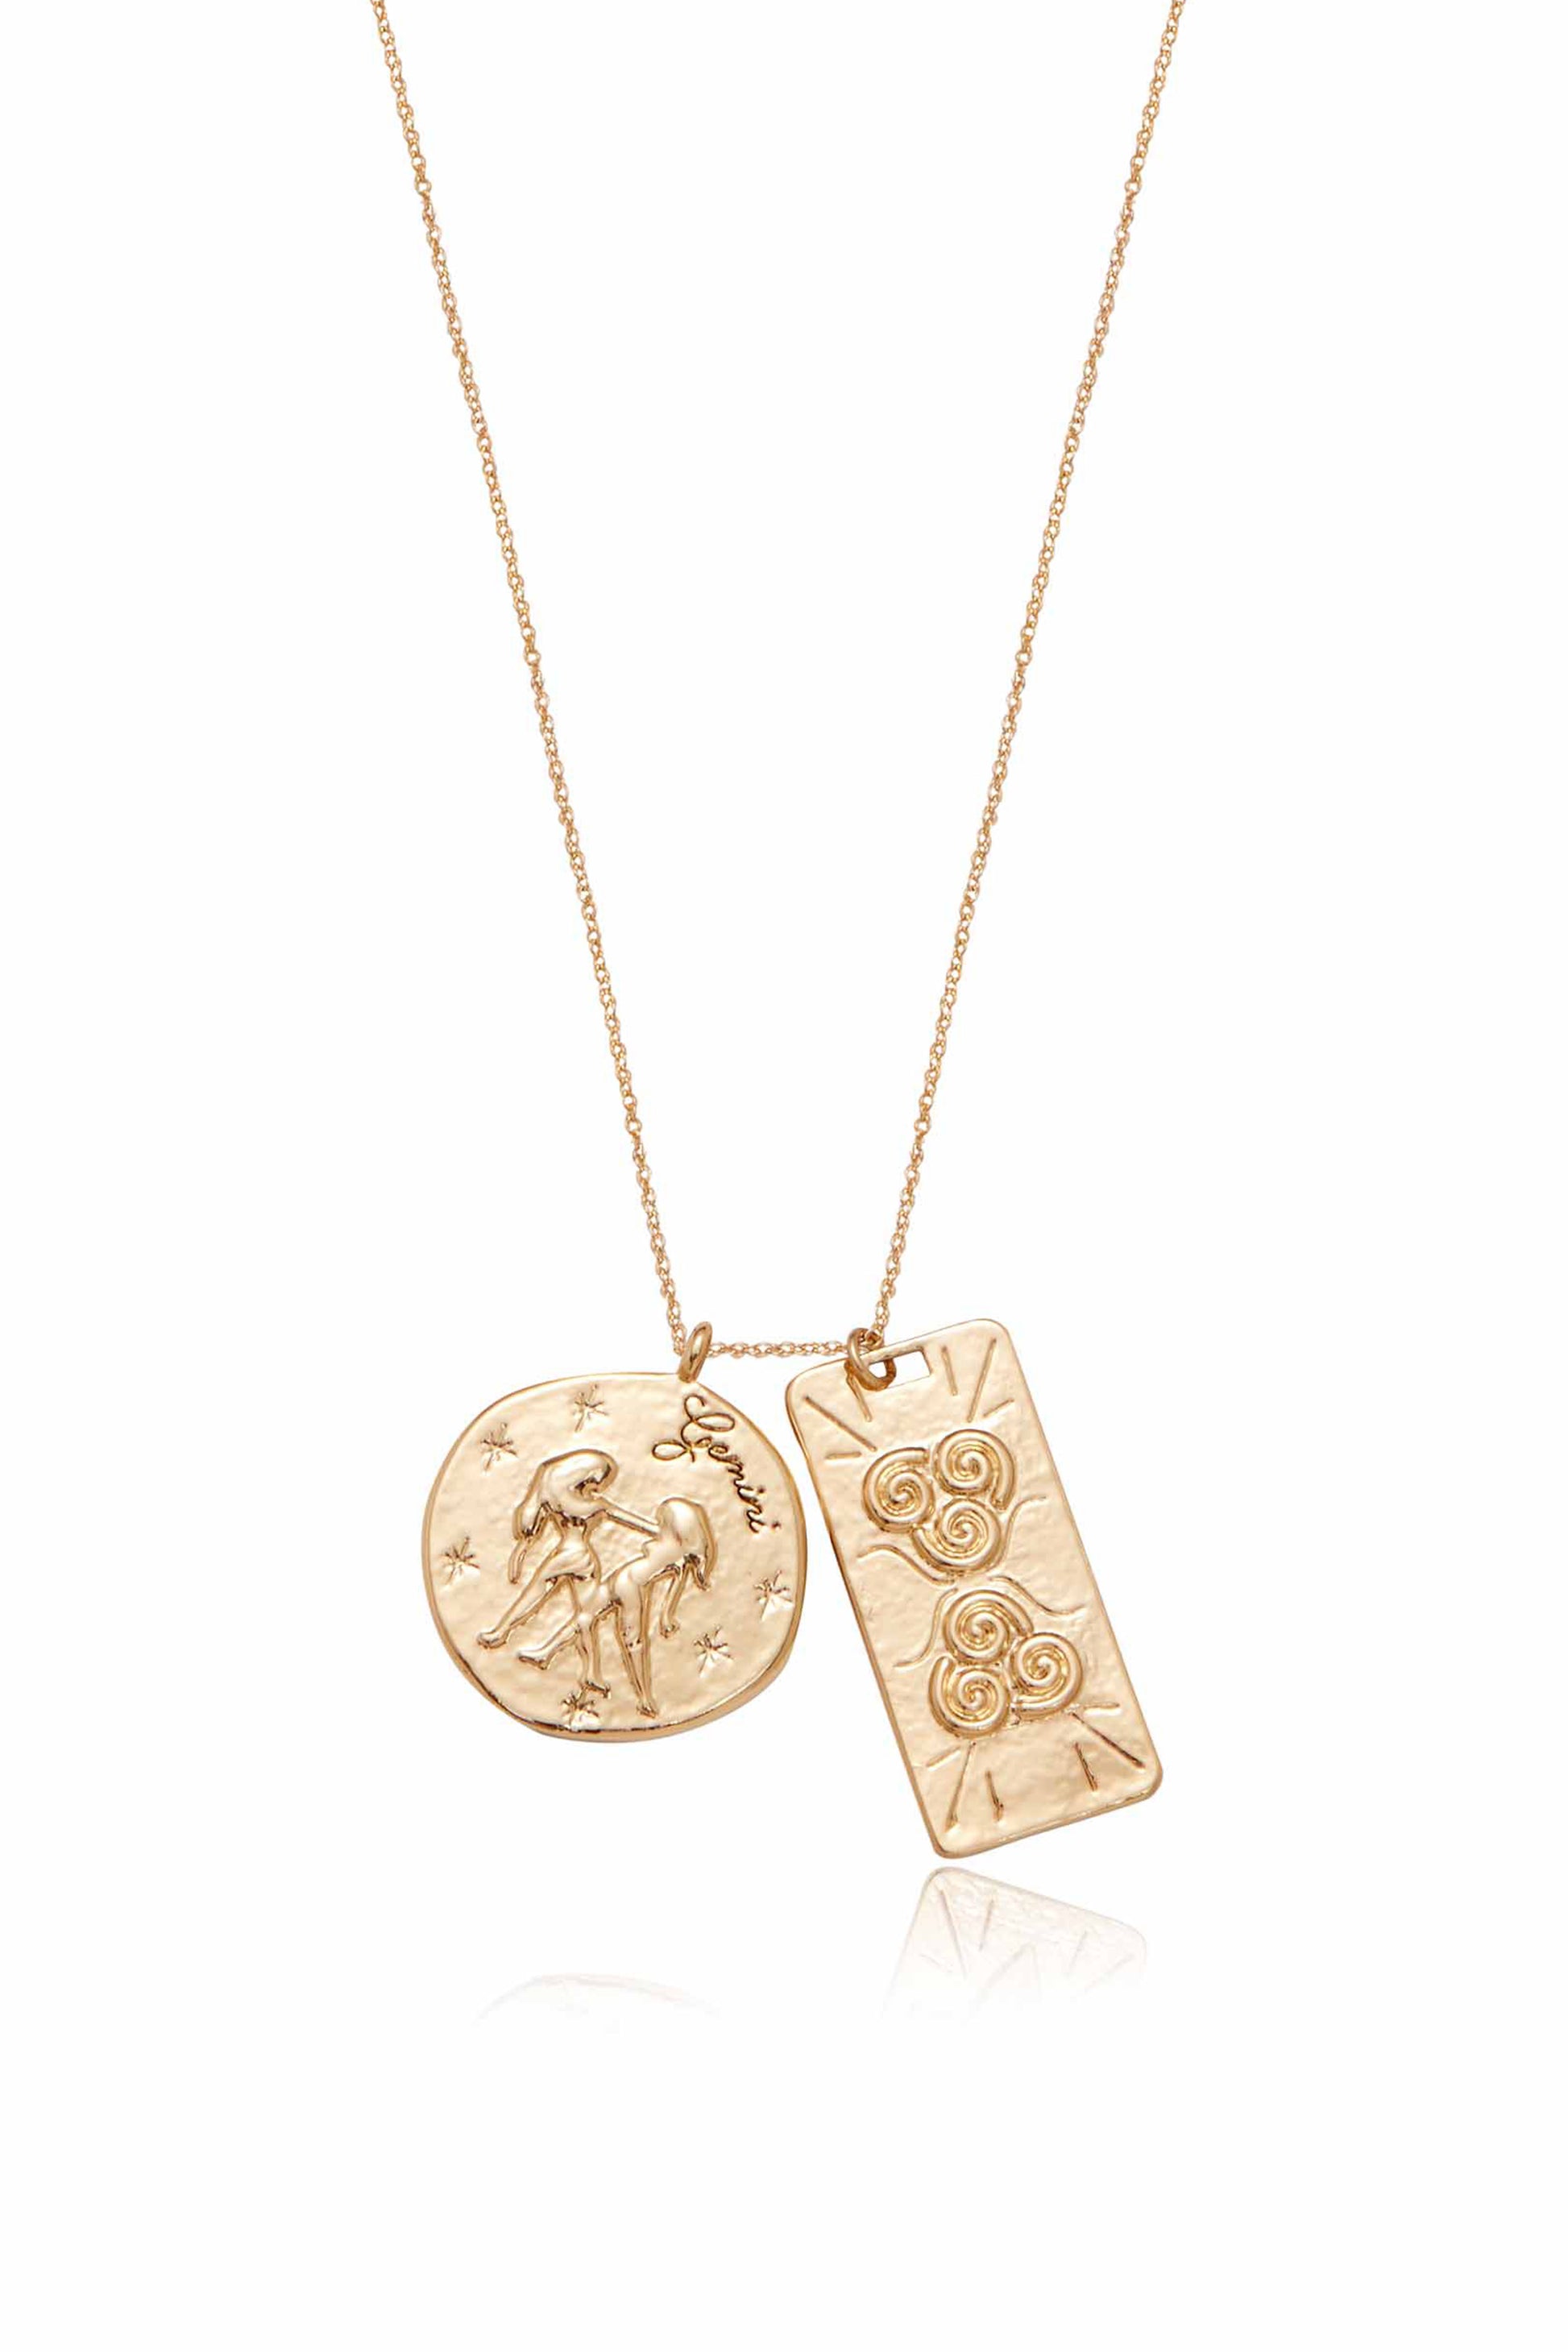 Zodiac Double Medallion 18k Gold Plated Necklace gemini close up